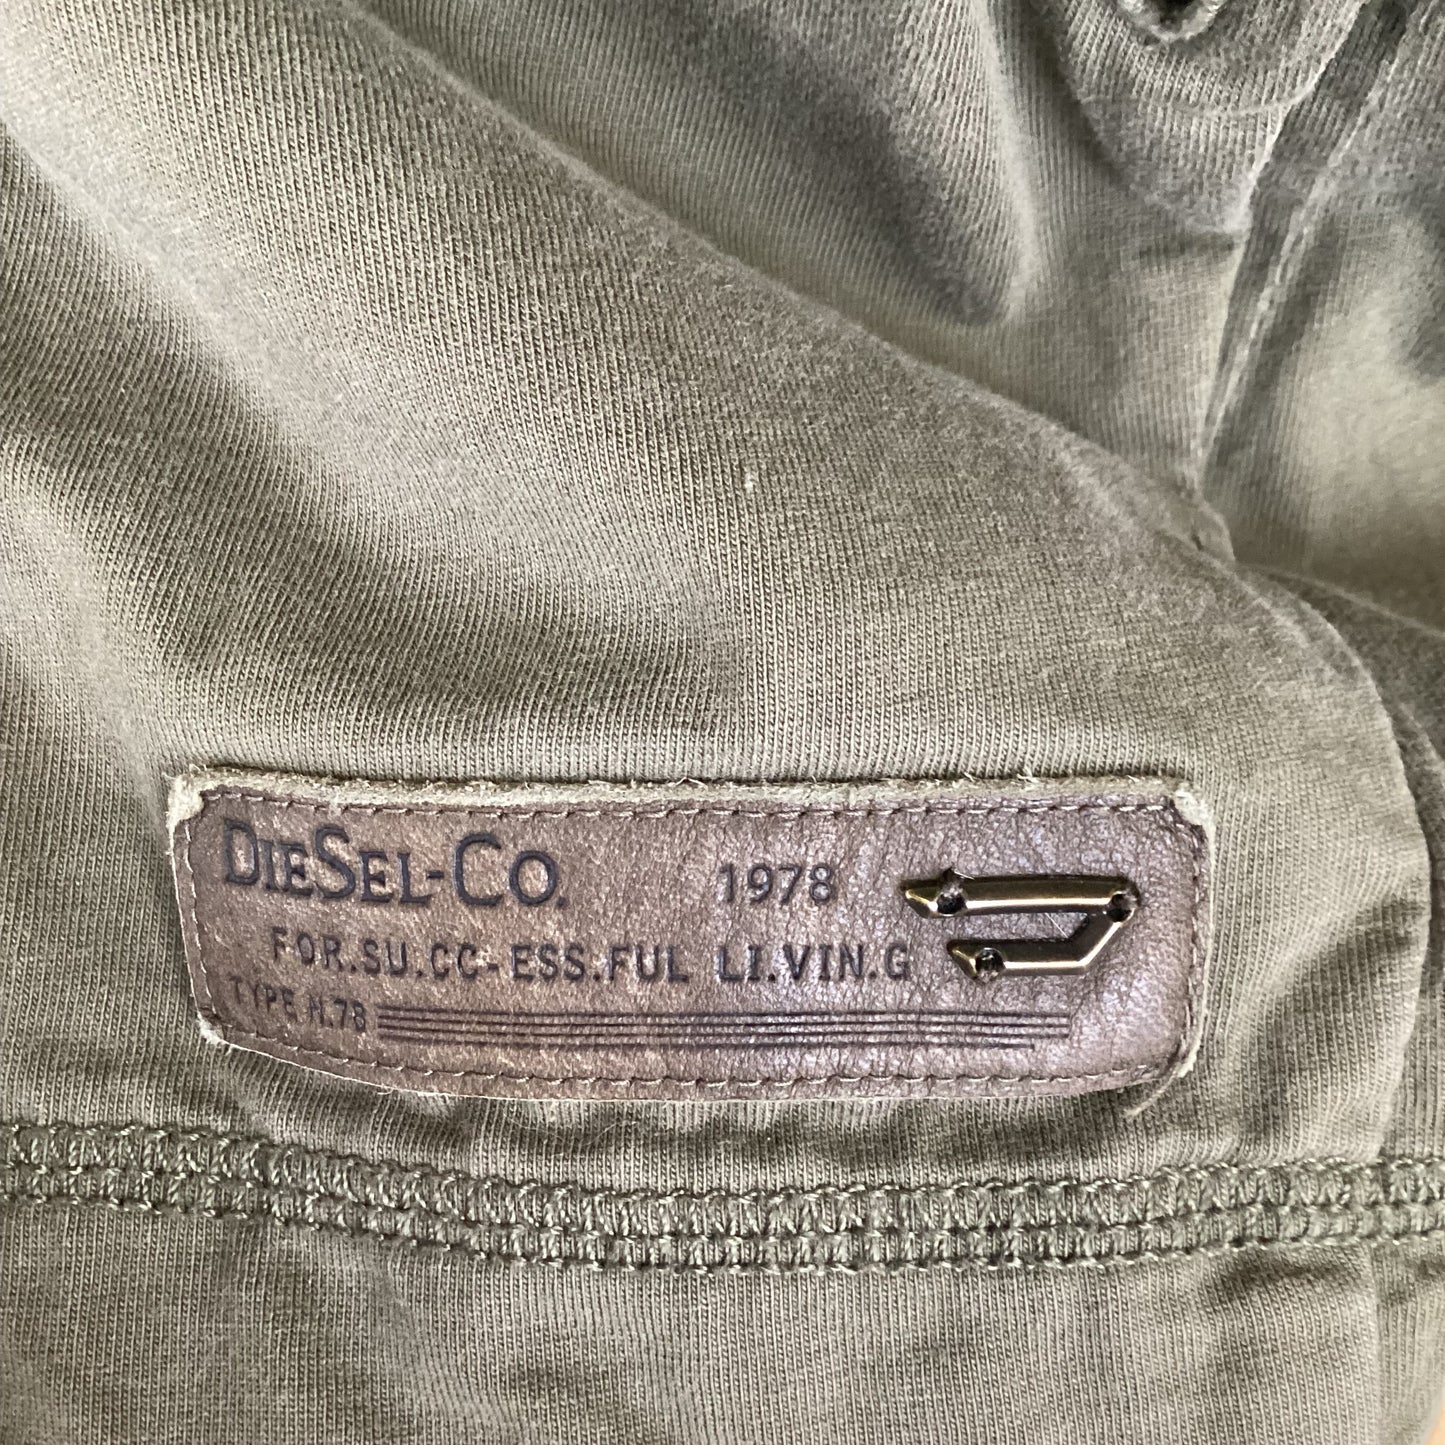 Jacket Other By Diesel  Size: S